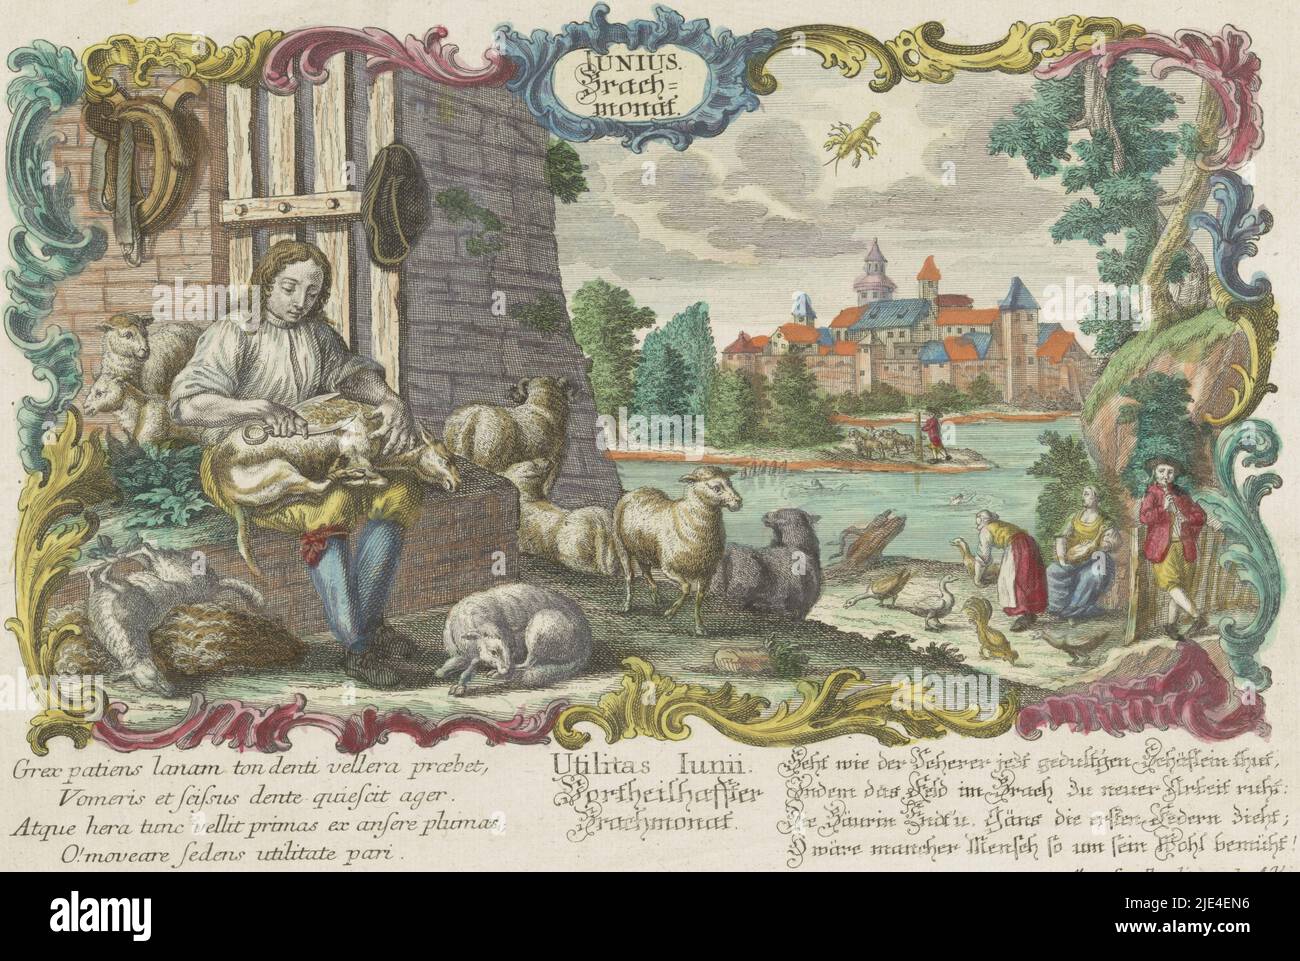 June, anonymous, 1694 - 1756, A shepherd at work in a landscape with various animal and human figures. In the background a vista across the water to a walled city. In the lower margin twice a four-line text in Latin and German., print maker: anonymous, publisher: Martin Engelbrecht, (mentioned on object), Keizerlijk hof, (mentioned on object), Augsburg, 1694 - 1756, paper, etching, h 210 mm × w 303 mm Stock Photo